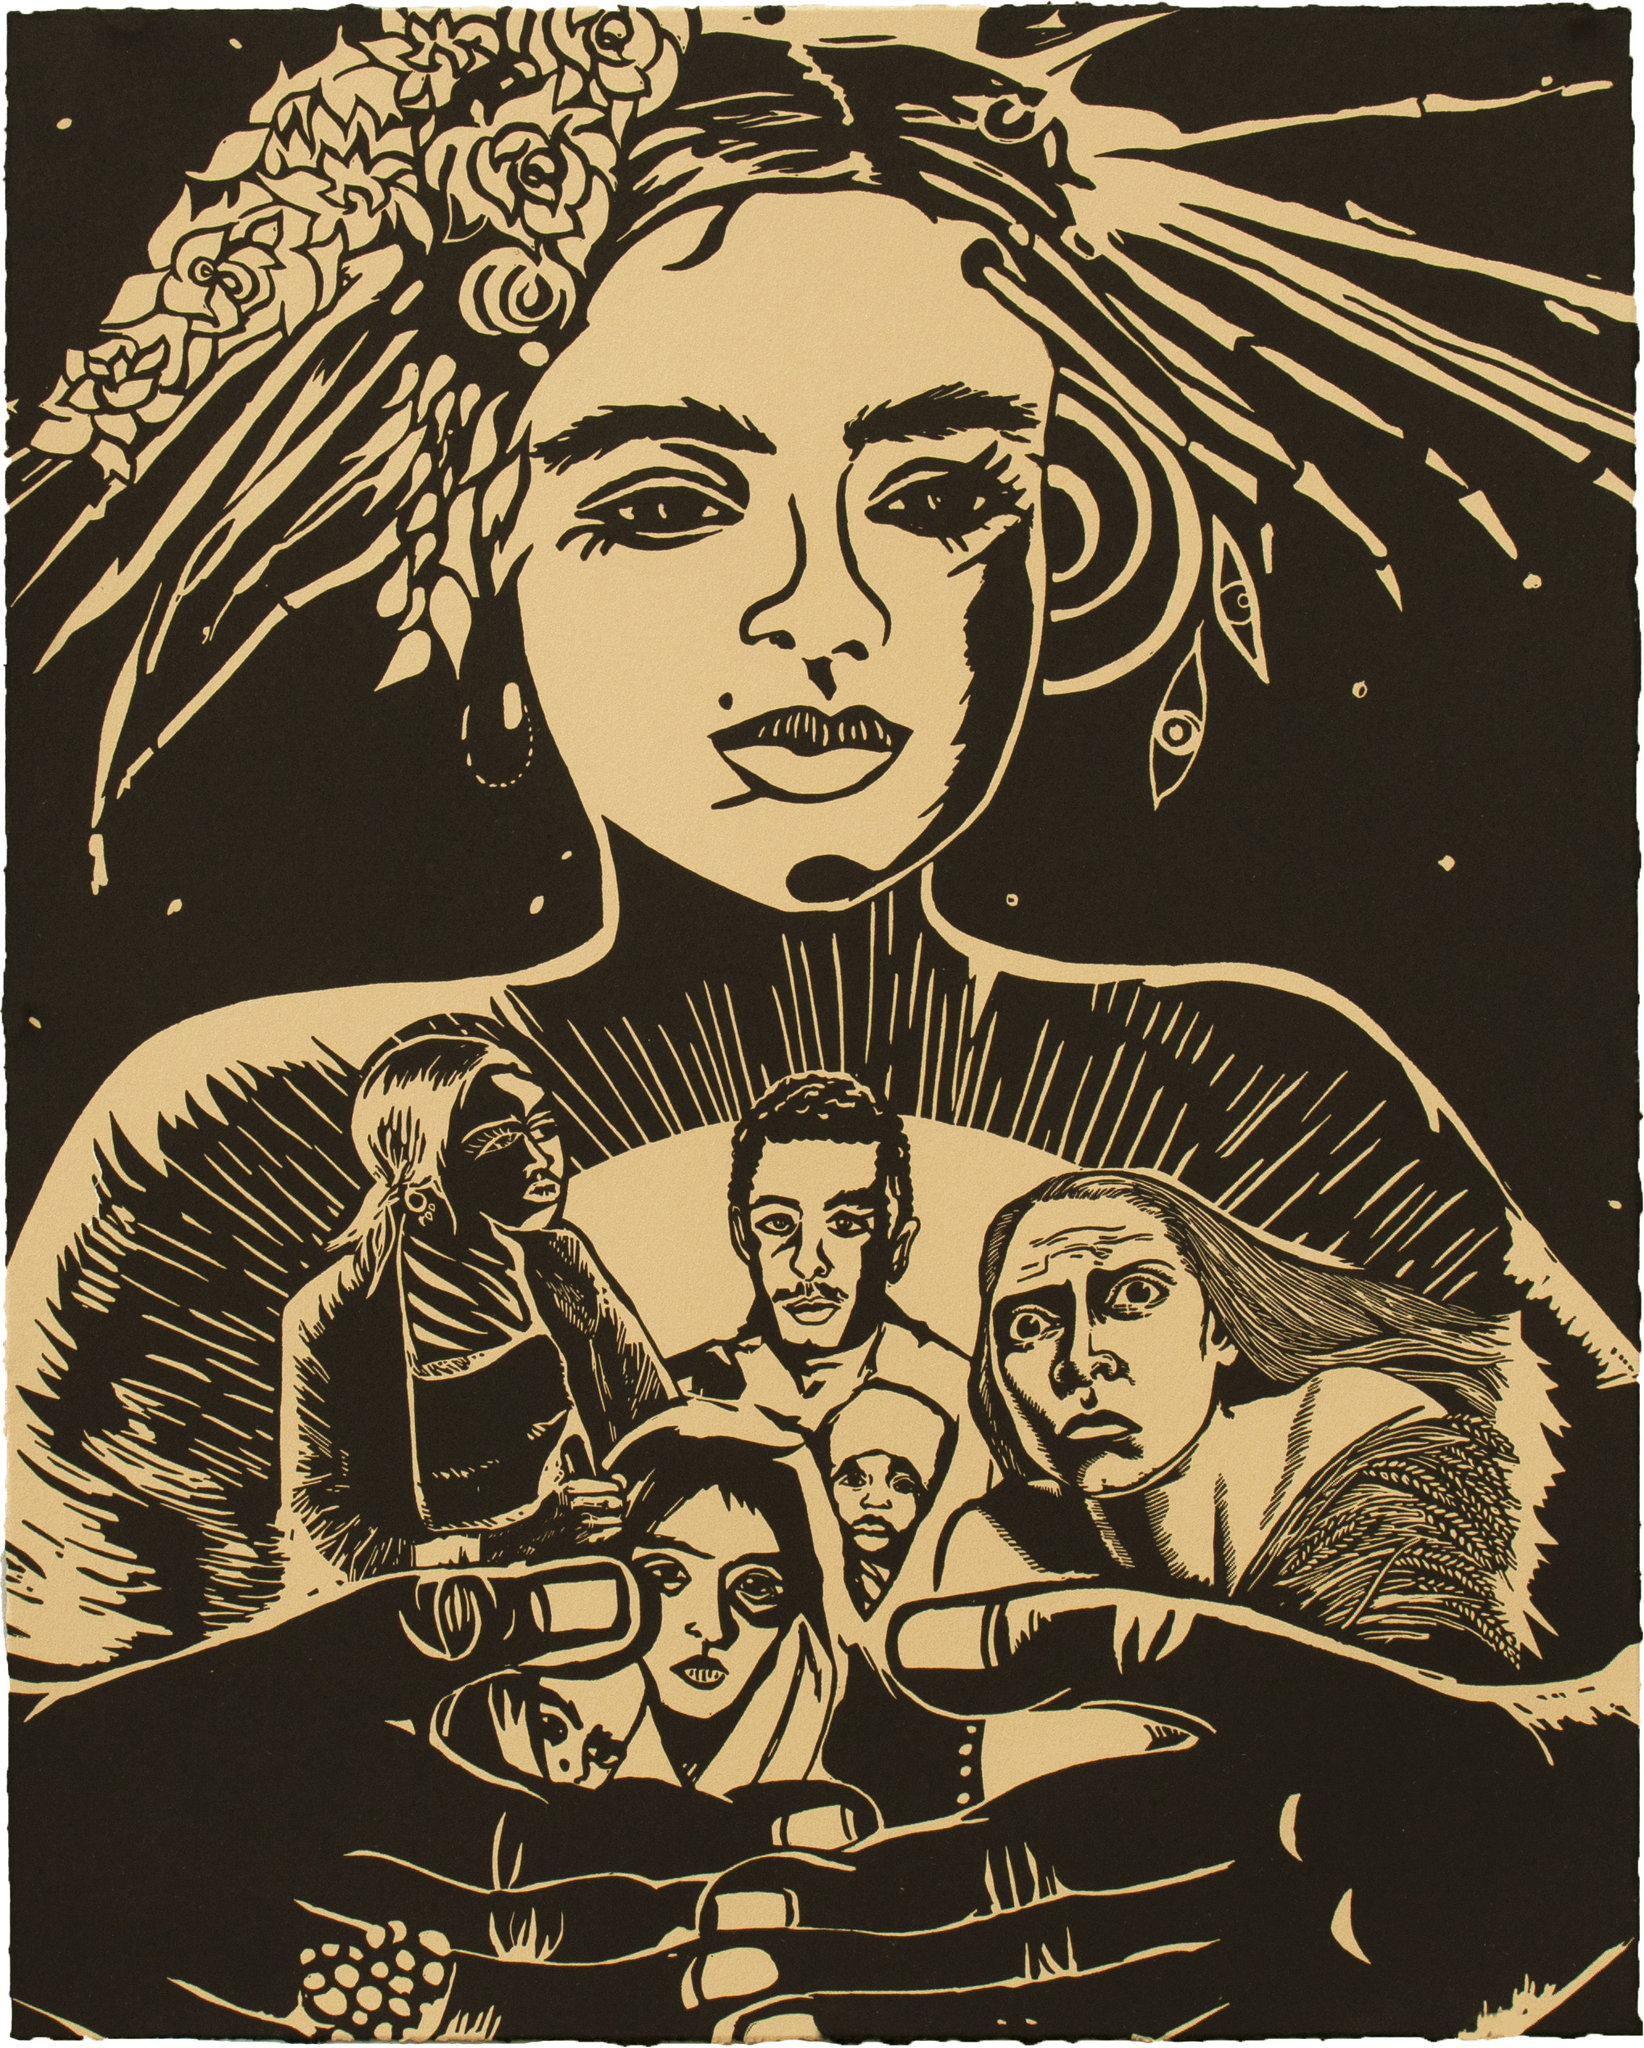  Chitra Ganesh,  Refugees and Queen , 2018, Linocut BFK Rives Tan, 280gsm, Edition of 35, 20 1/ 8 x 16 1/8 inches (51.1 x 41 cm) 